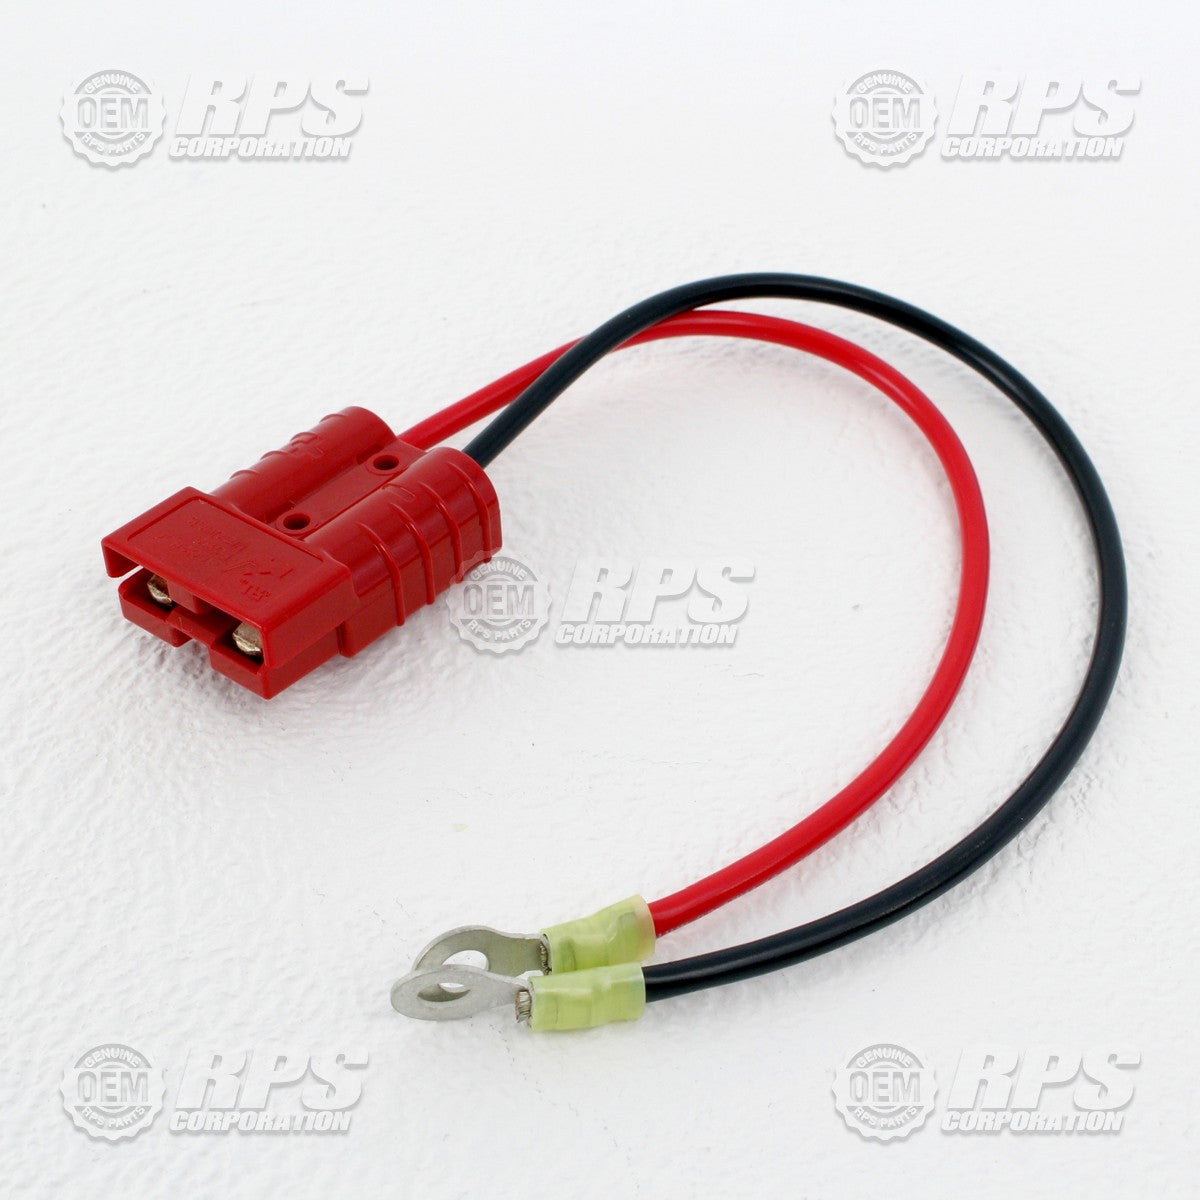 FactoryCat/Tomcat 253-2322, Harness Charge Circuit